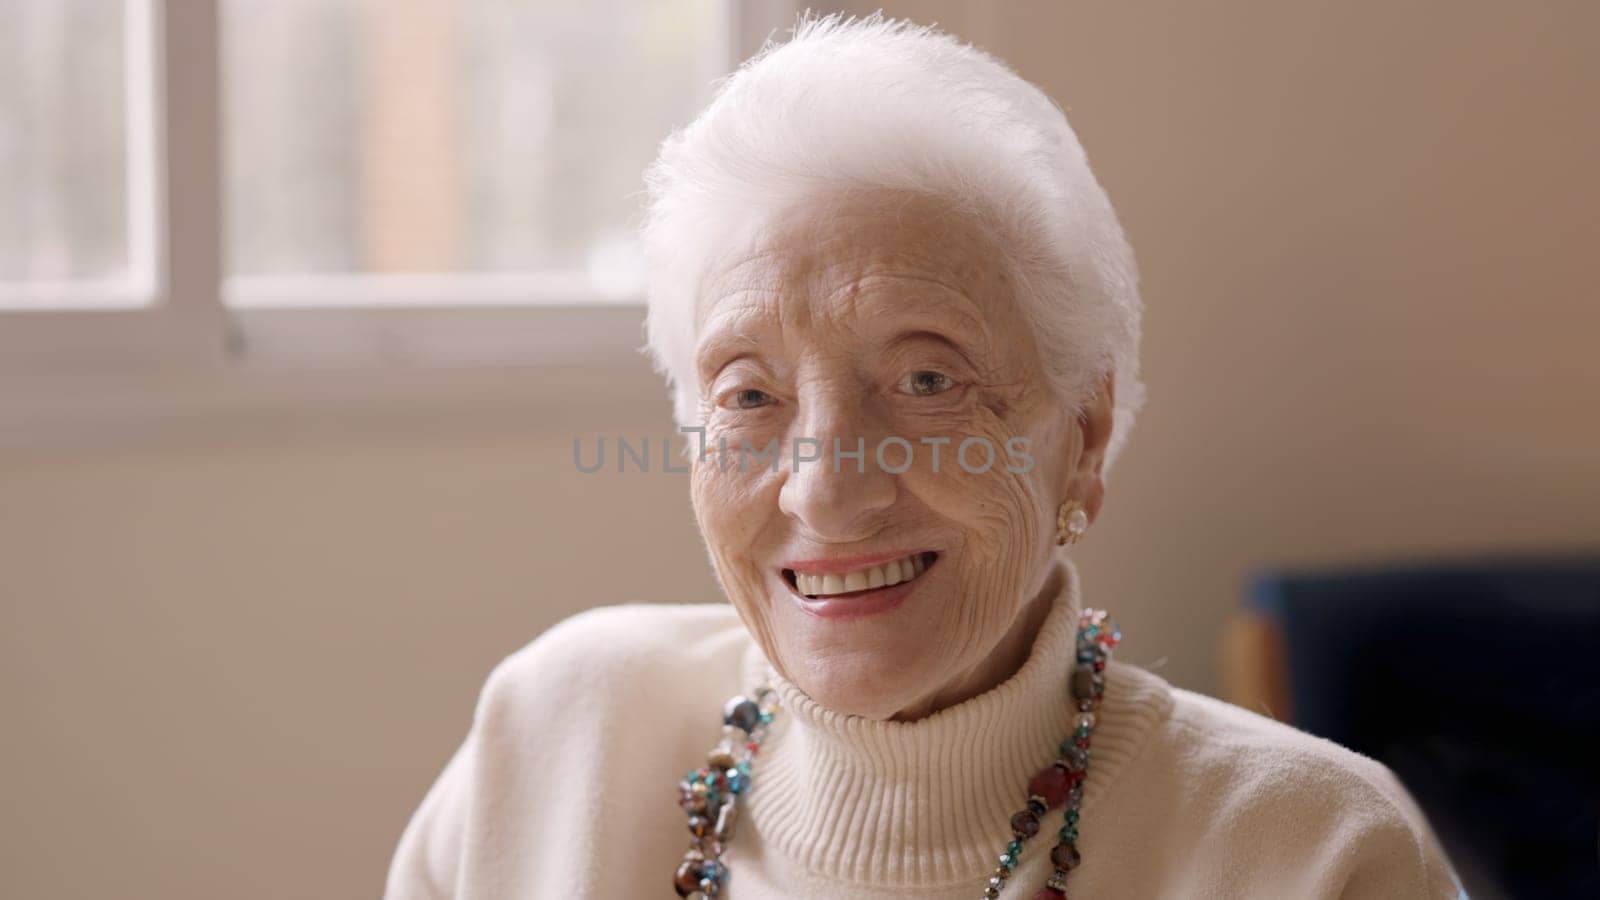 Old woman with white hair smiling at camera in a geriatric